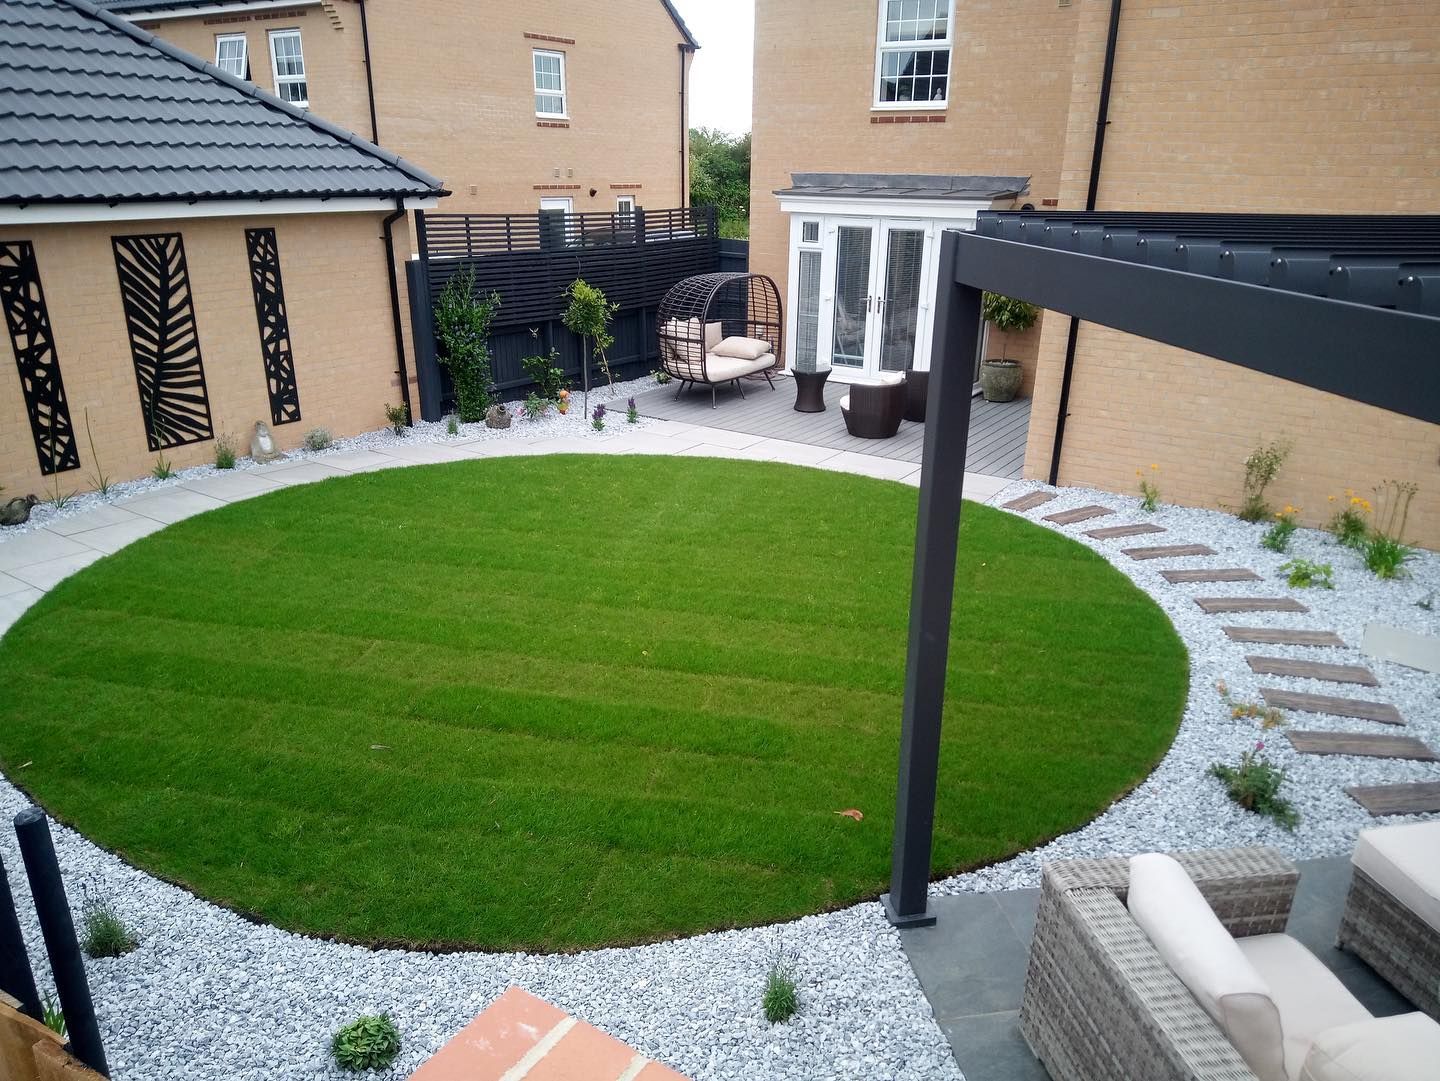 there is a circular lawn in the middle of the backyard .